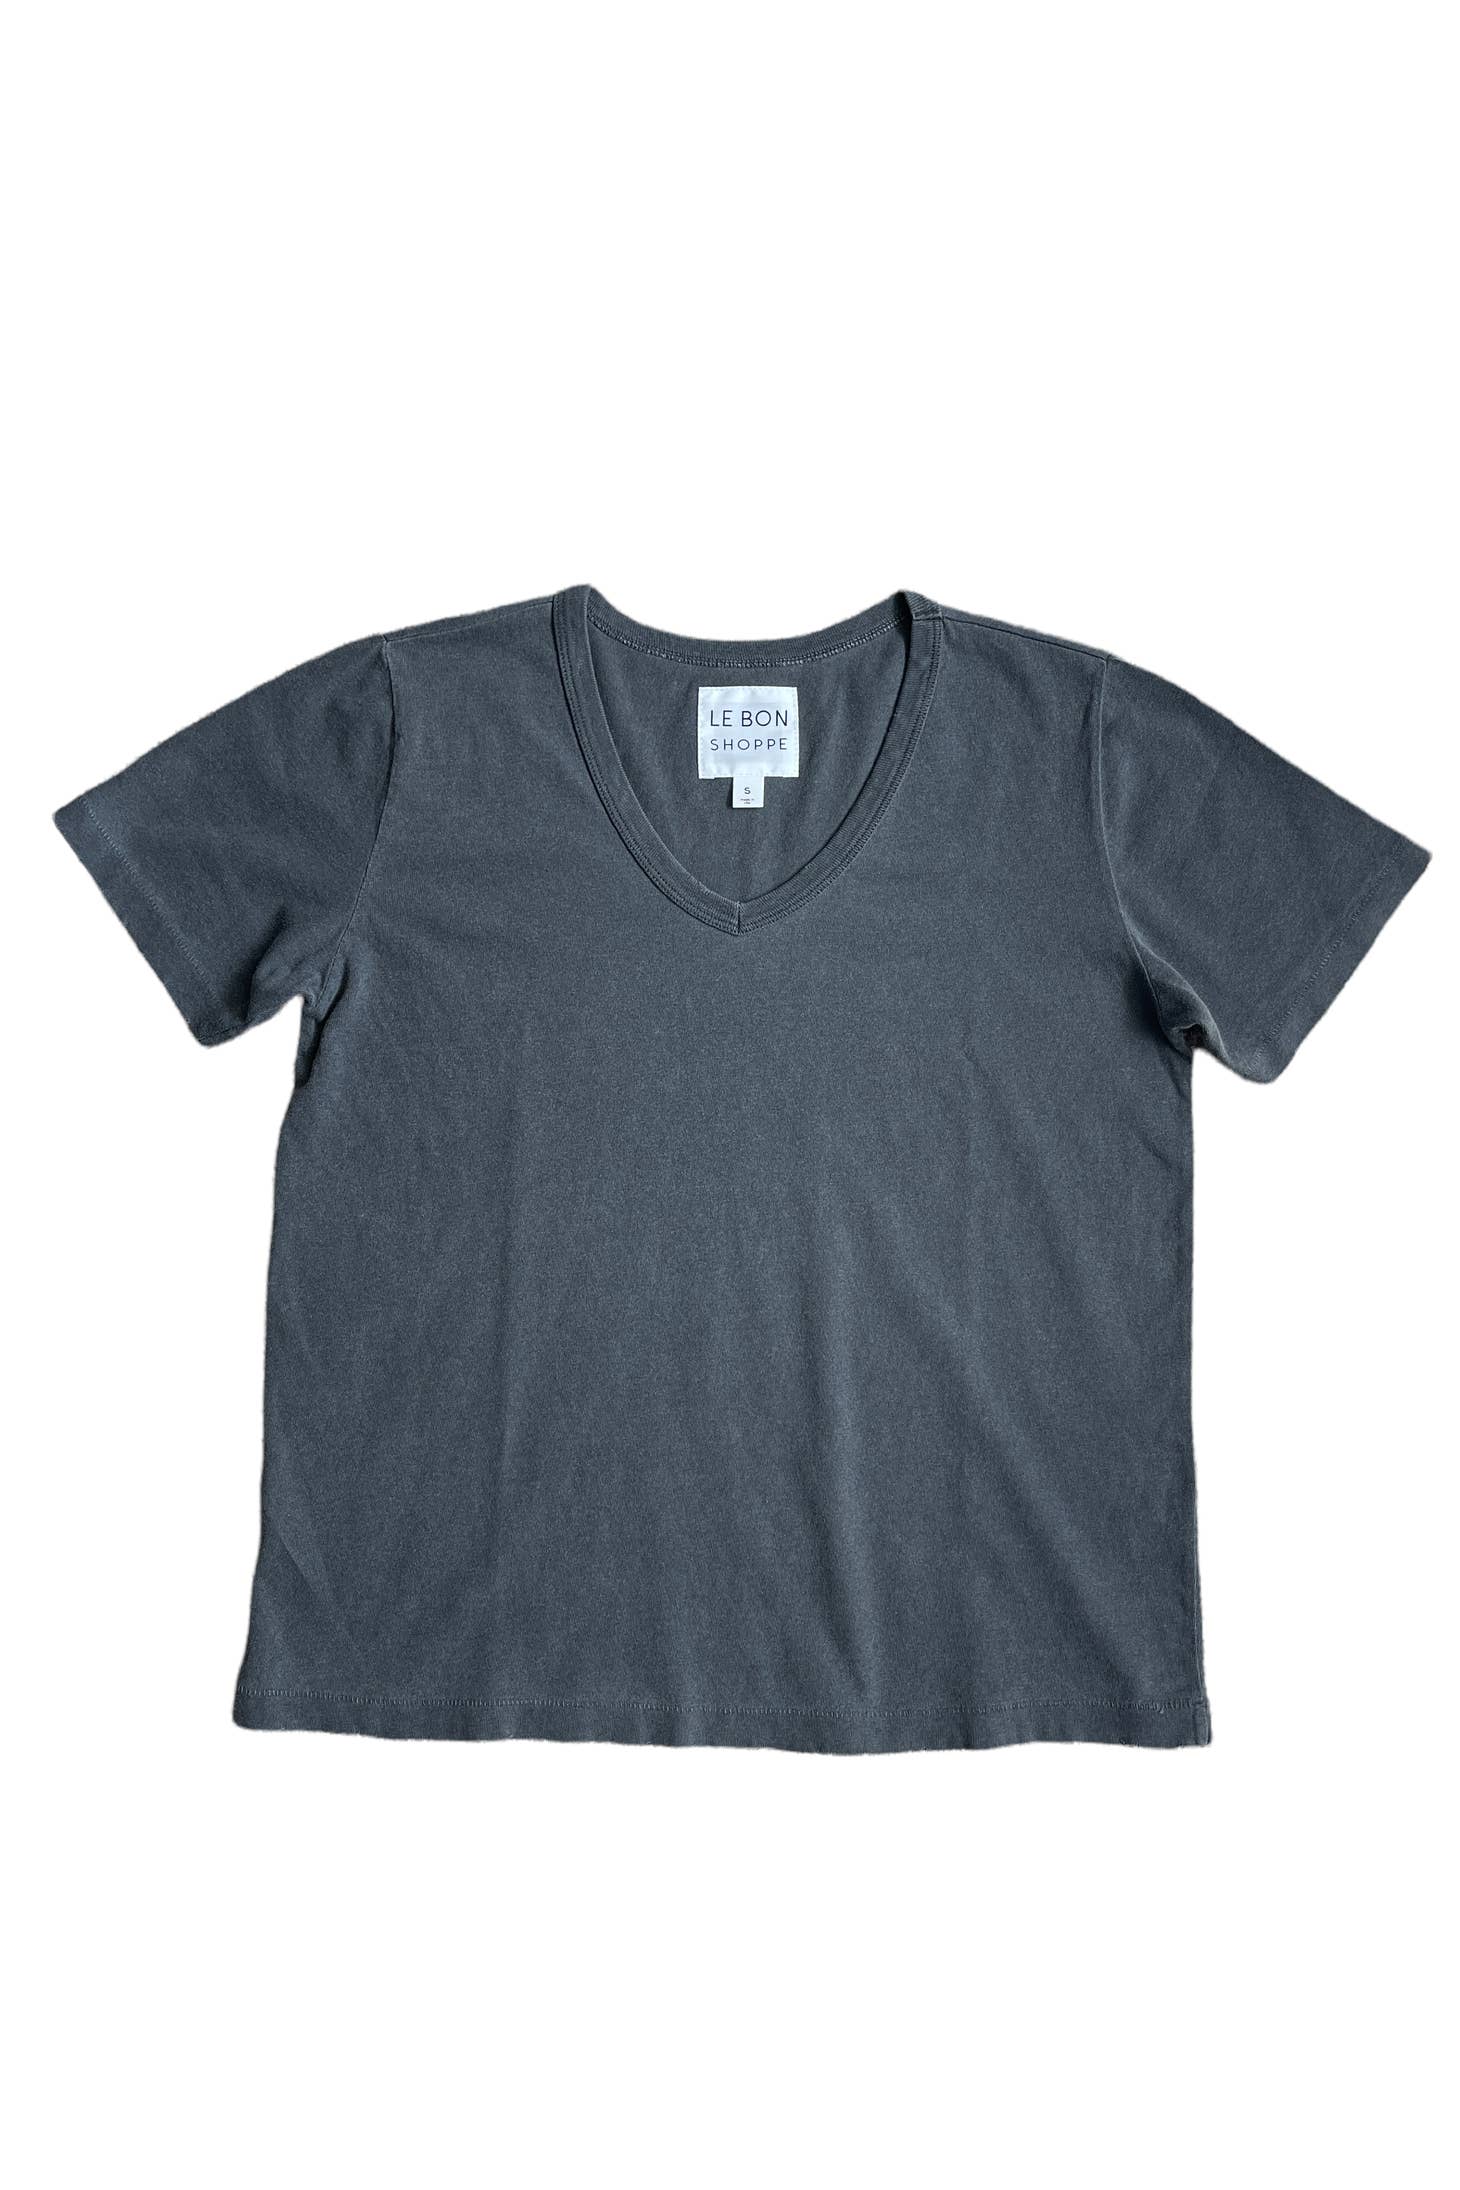 A classic cut organic vintage boy tee with the perfect v-neck. It is gently distressed for that gorgeous vintage look but without the smell, and has the most flattering relaxed fit. Made with organic cotton in LA.